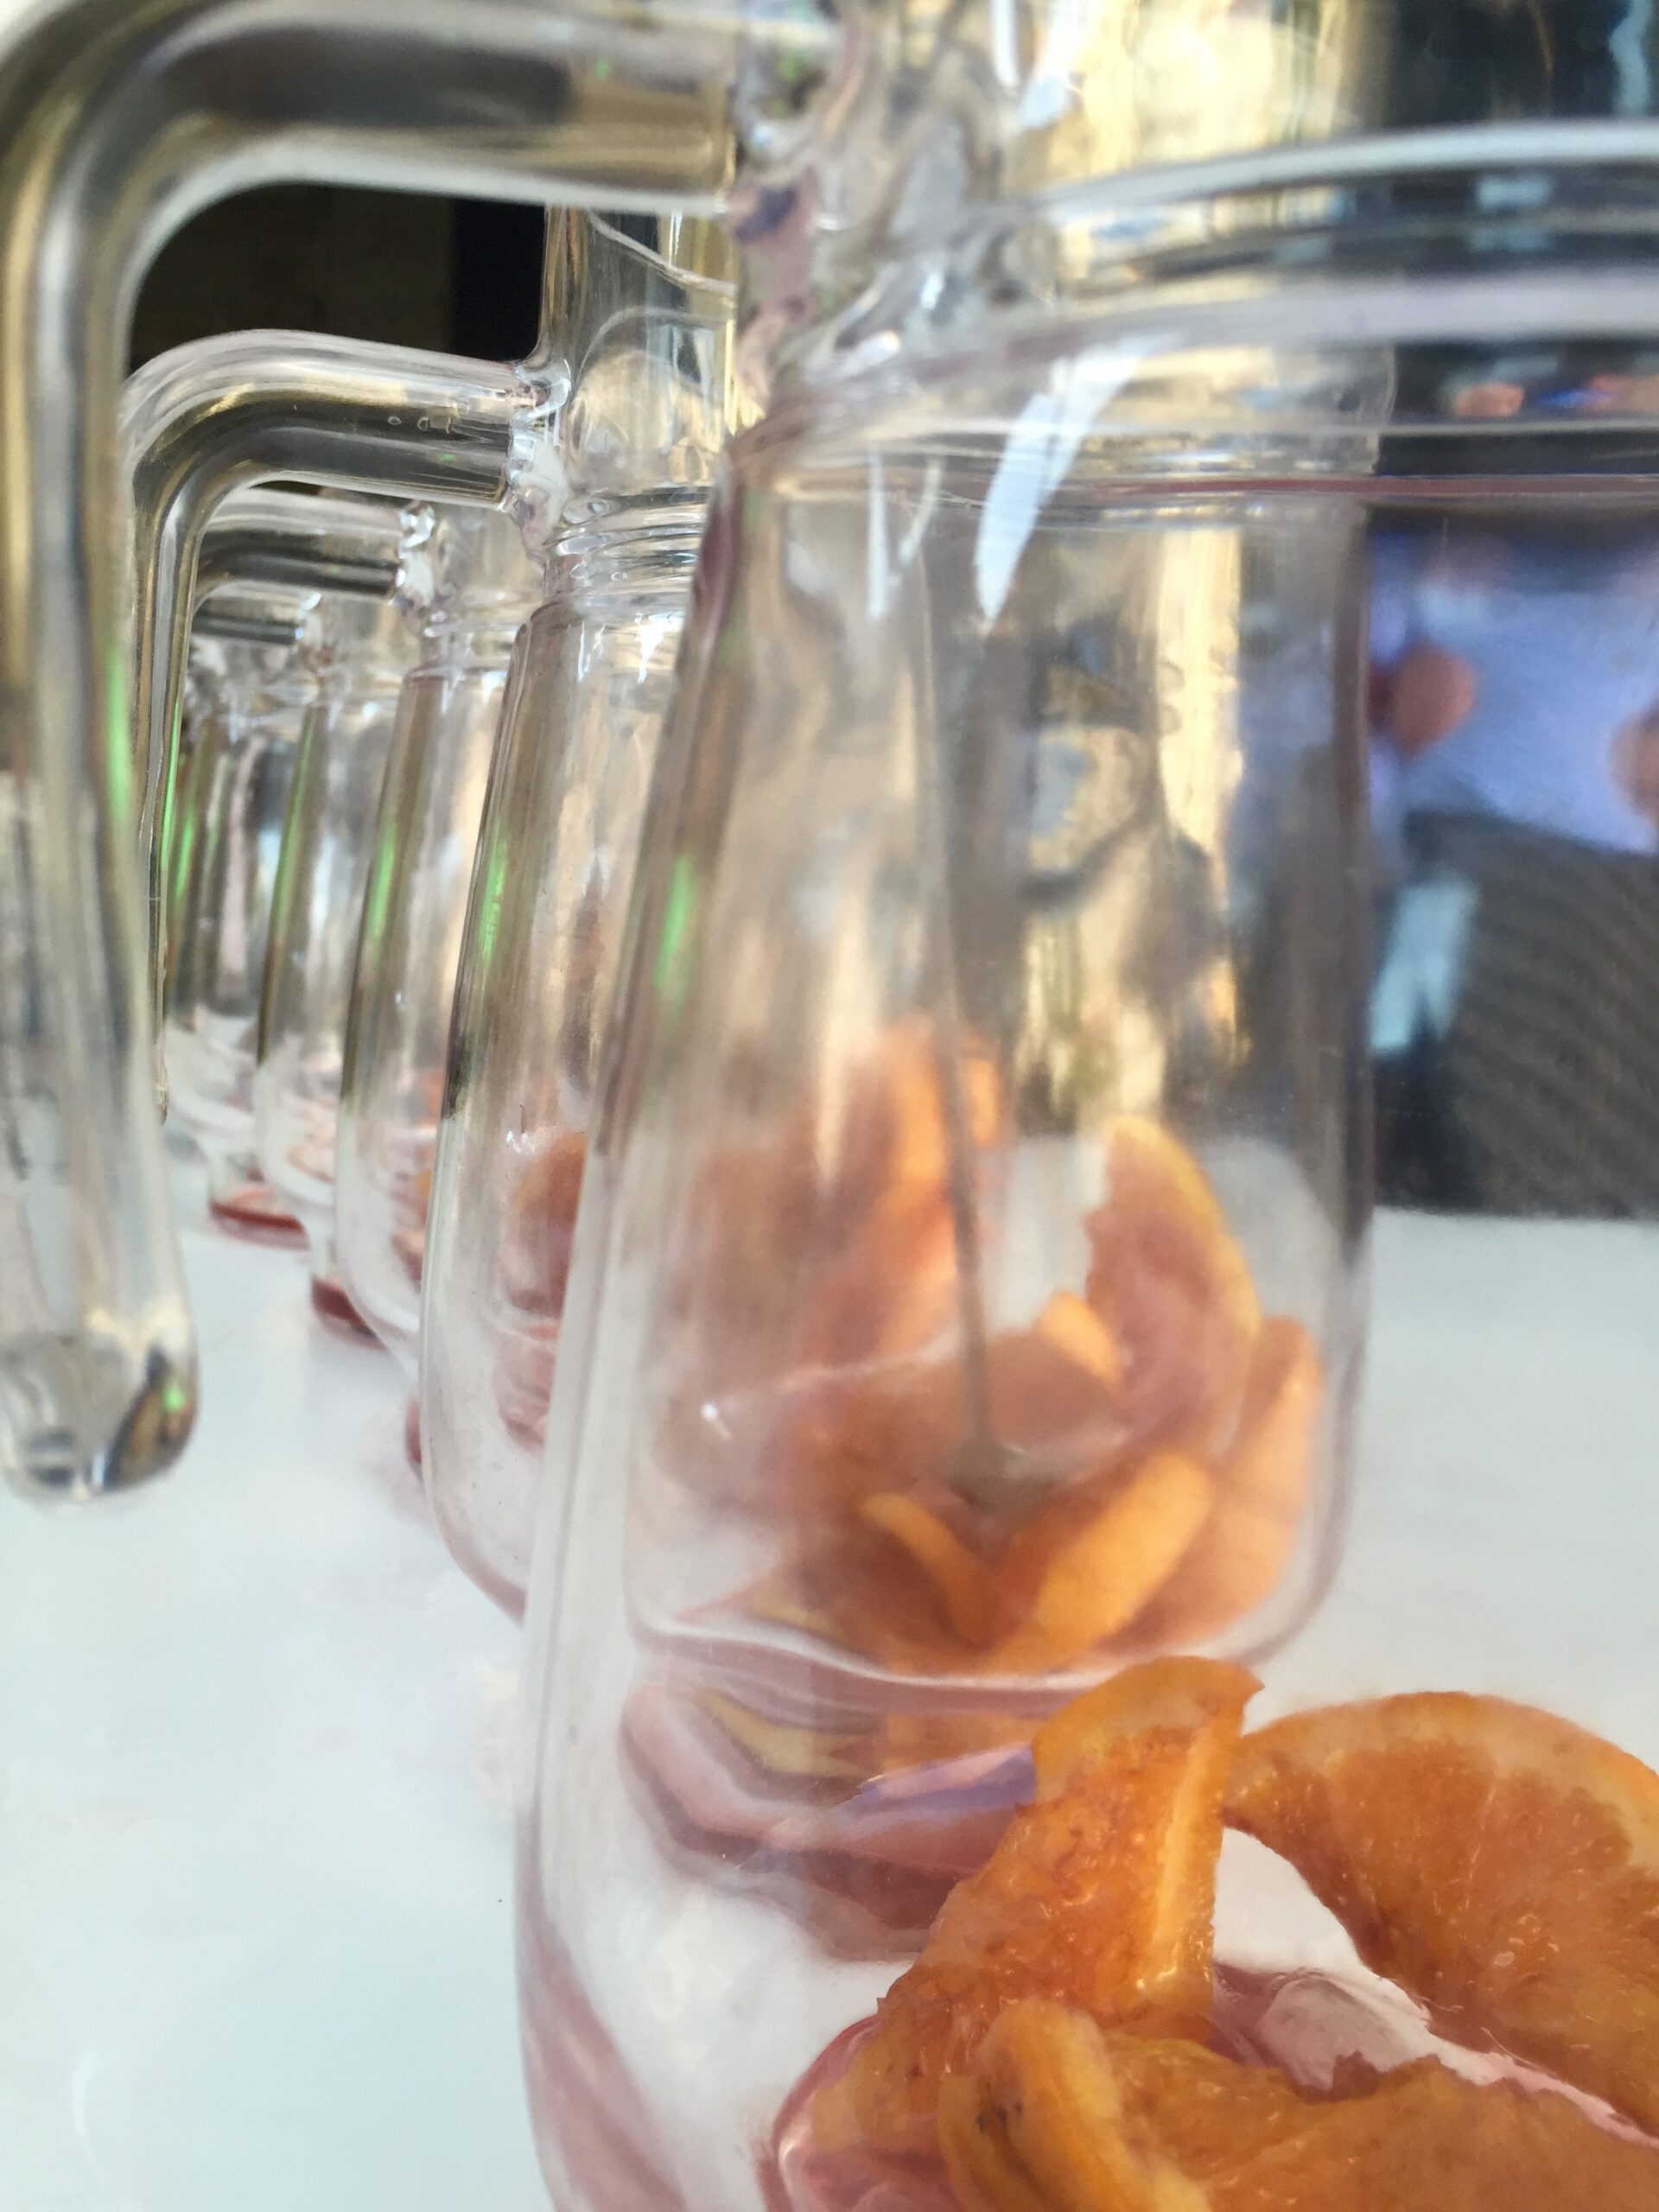 Pitchers of sangria sit on a table at Cafe Iru&ntilde;a in Pamplona, Spain.